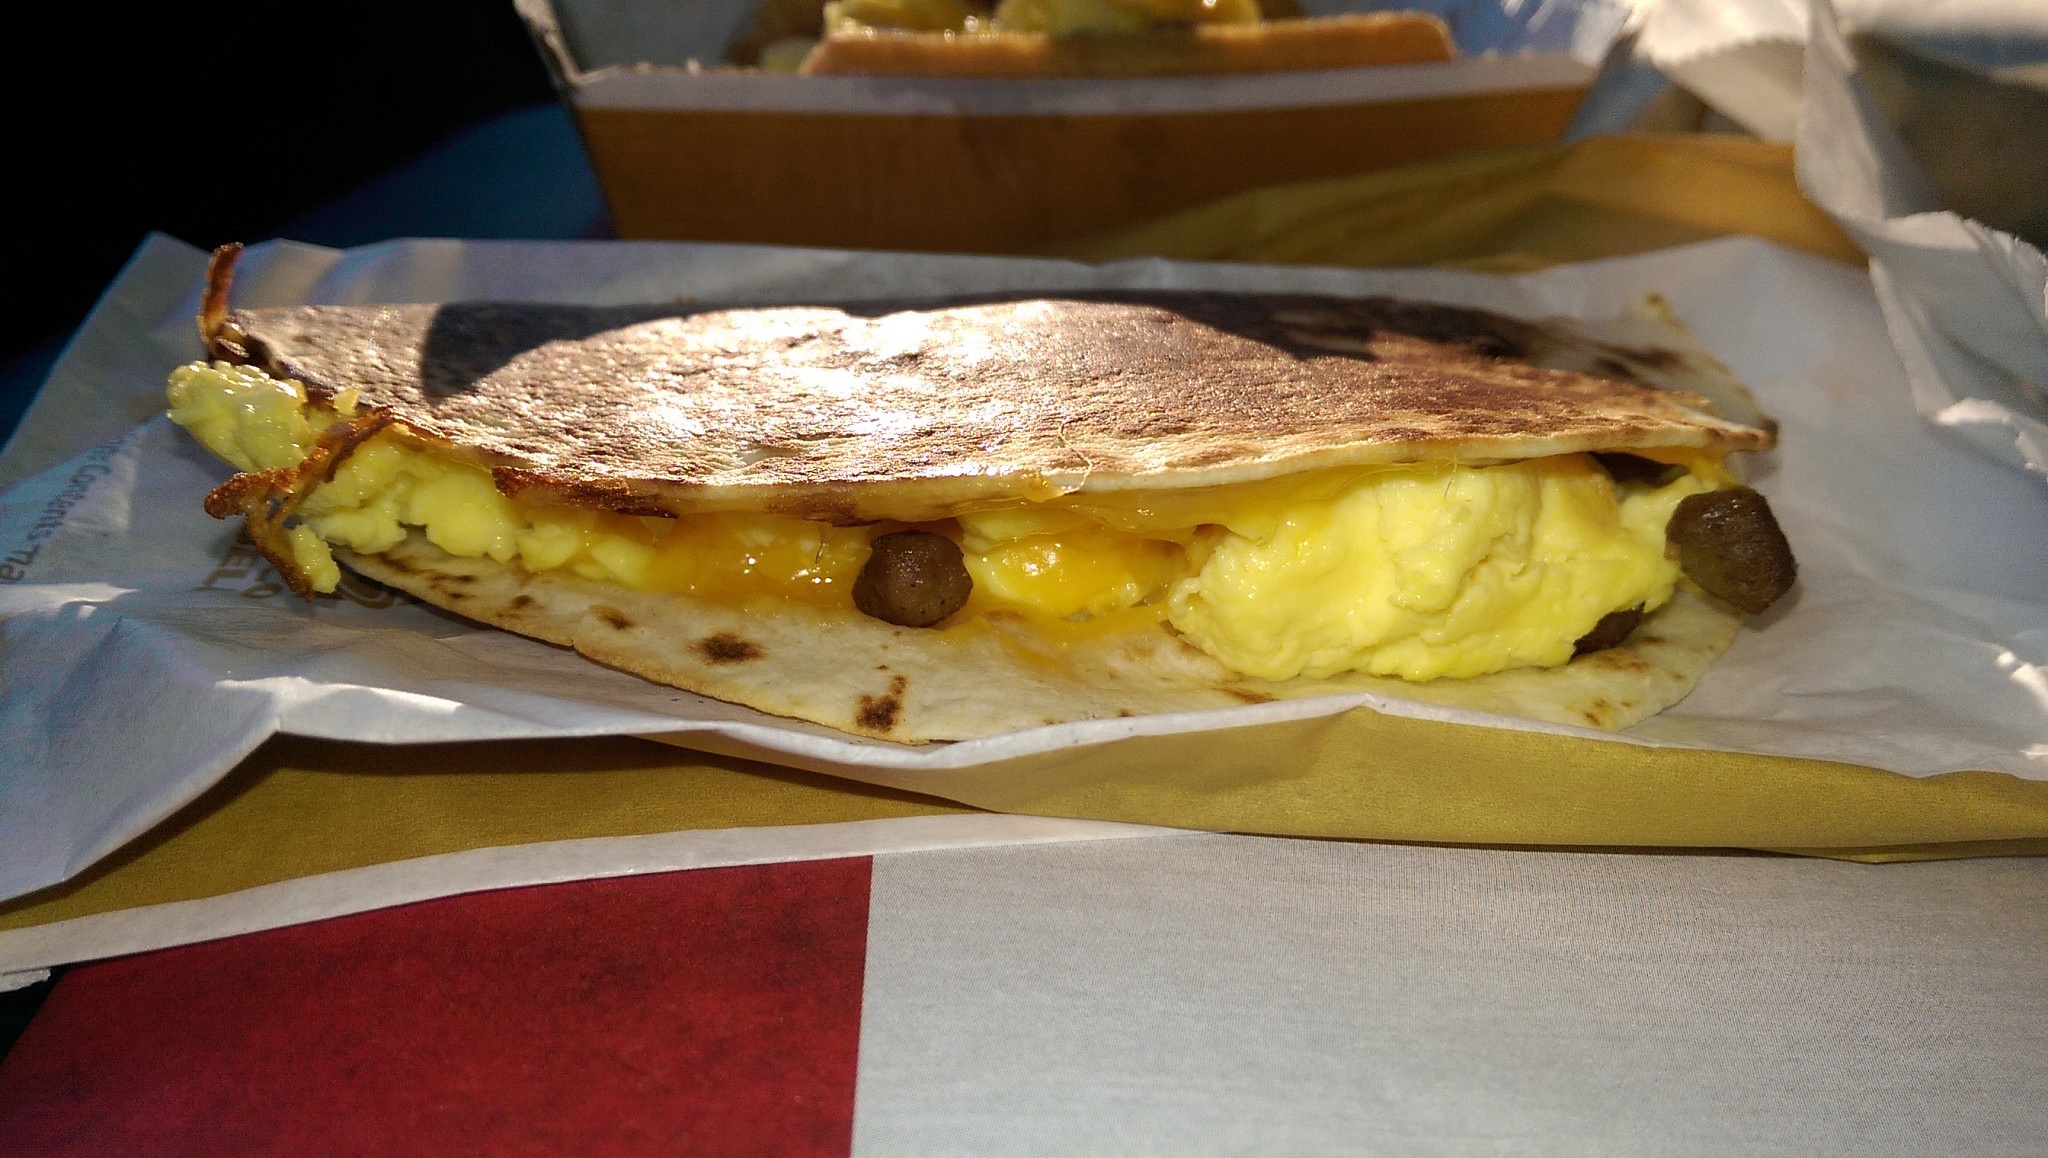 Food Review: Taco Bell's Breakfast Box - Bachelor on the Cheap